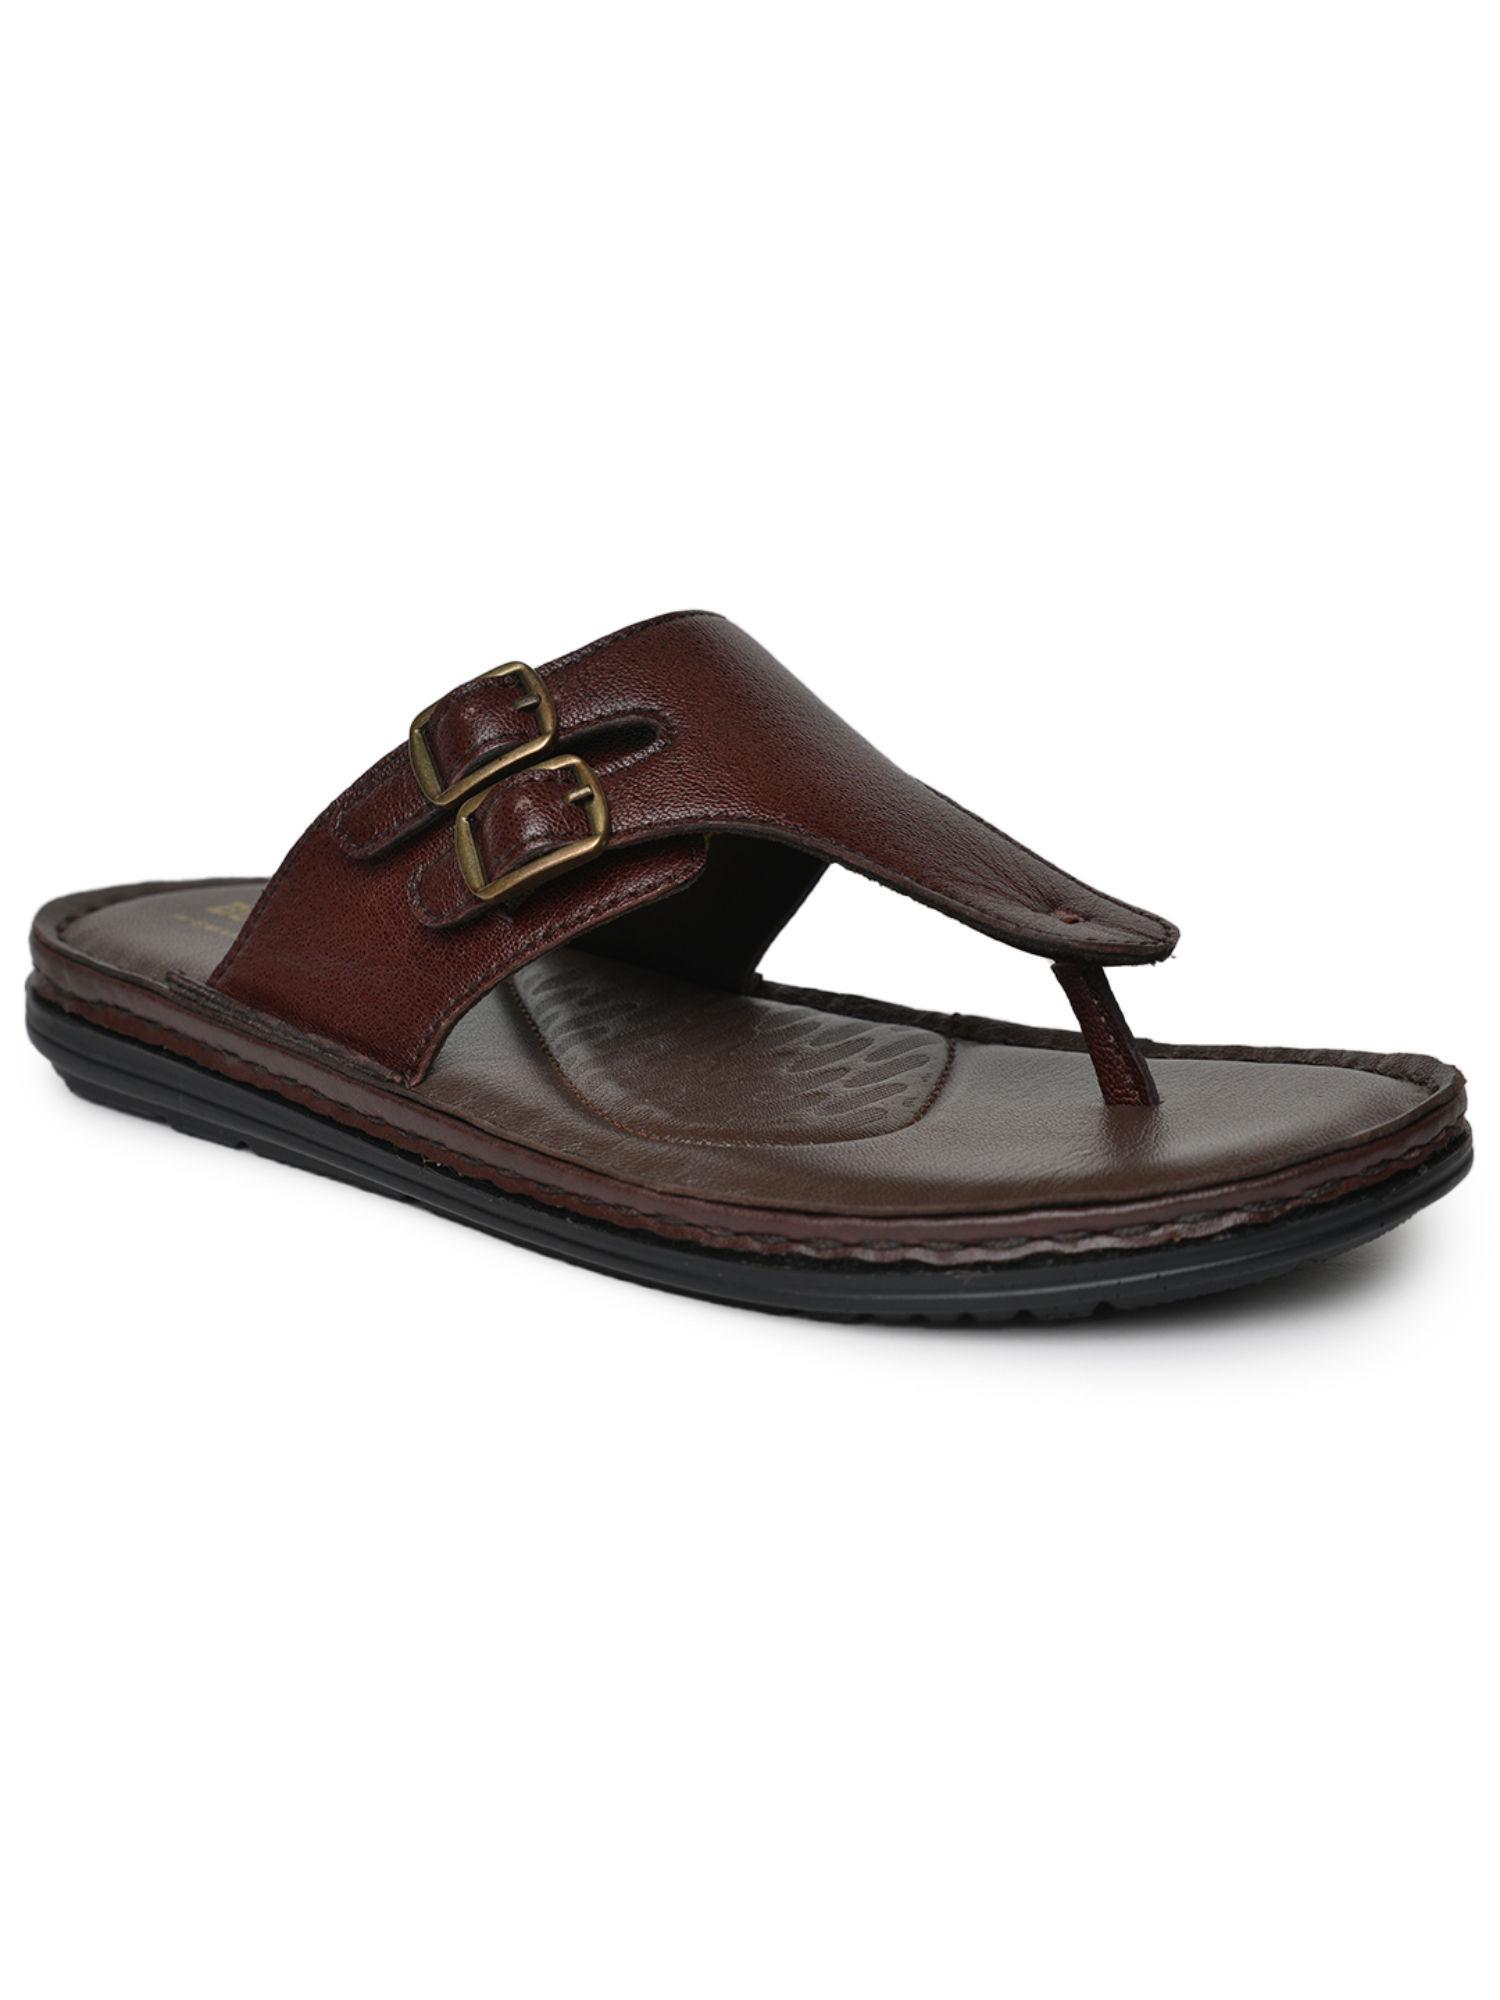 ace-full-grain-natural-leather-brown-casual-sandal-chappal